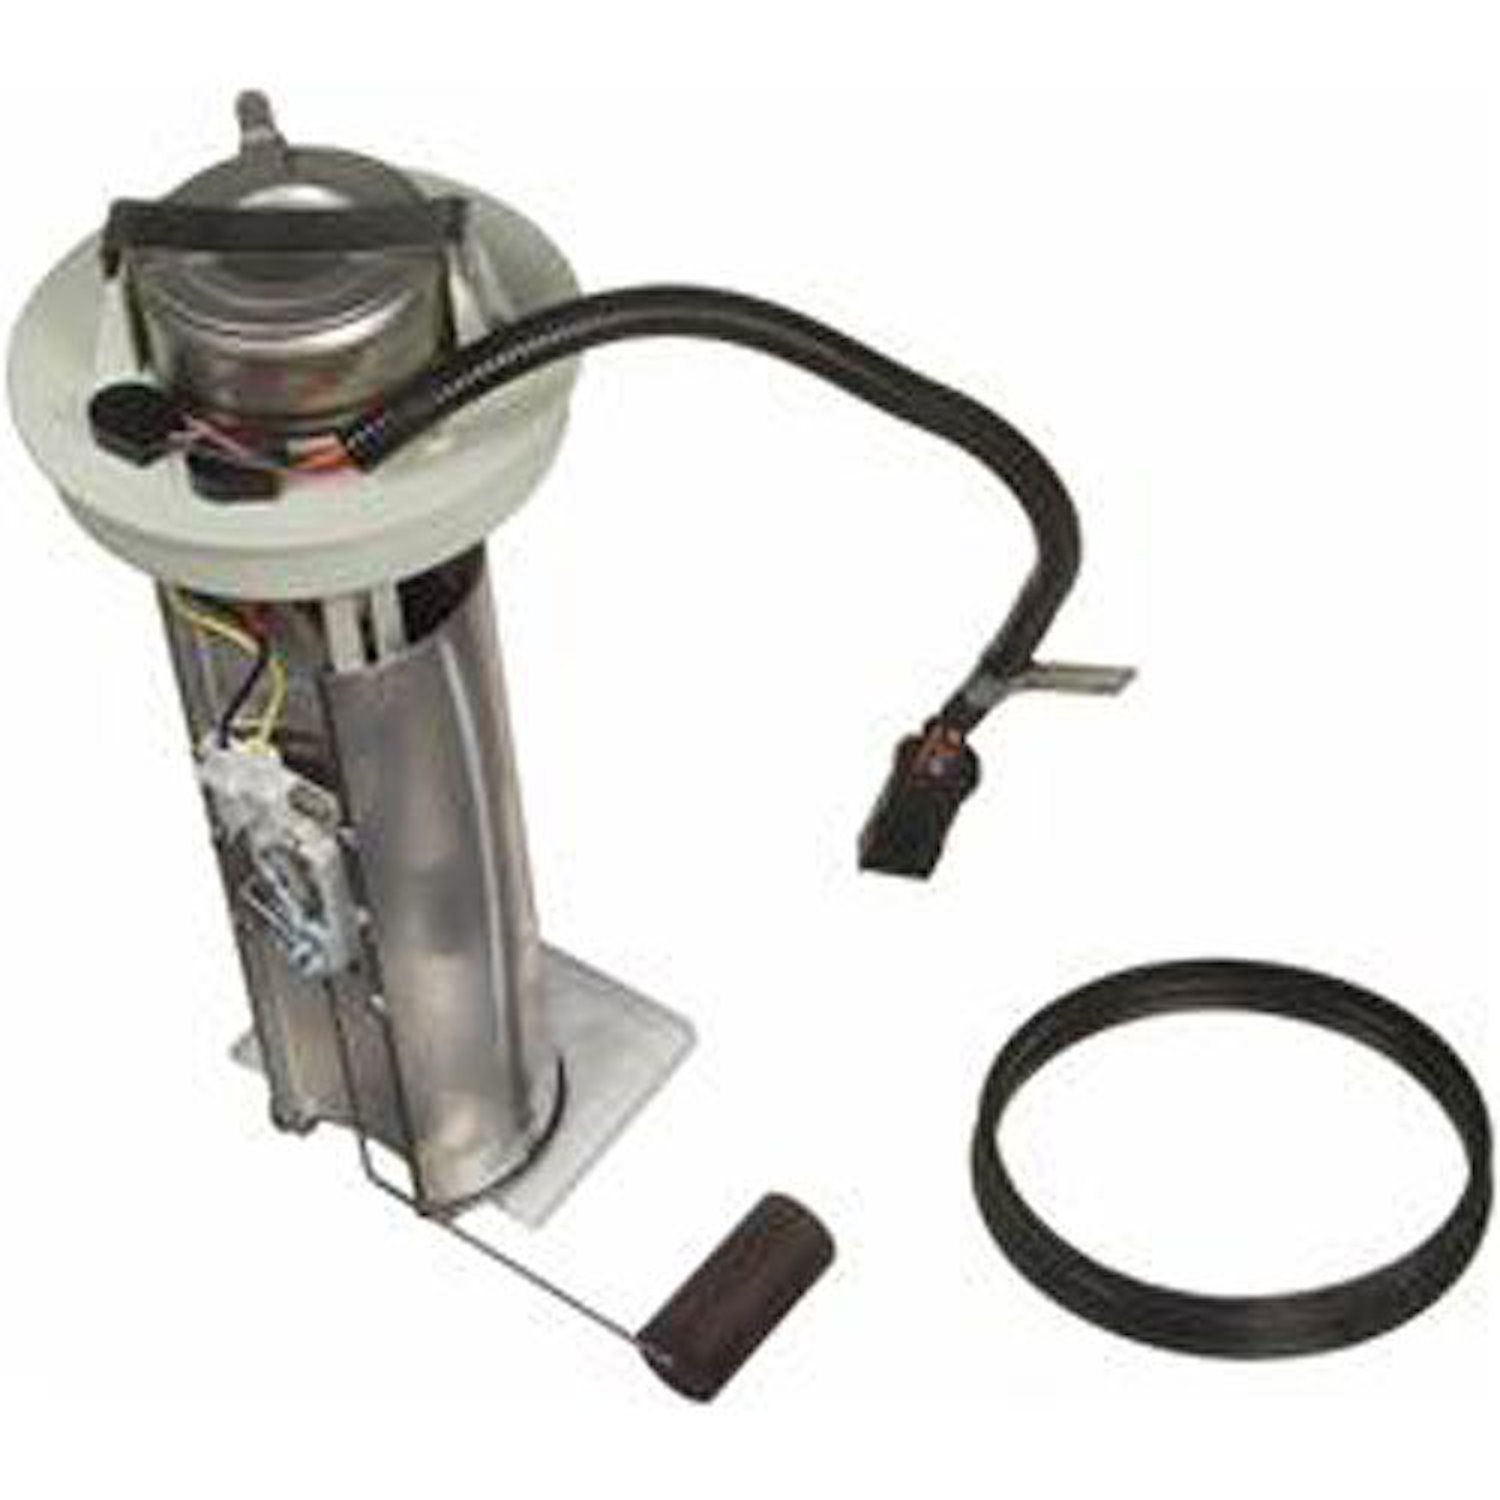 OE Chrysler/Dodge/Jeep Replacement Electric Fuel Pump Module Assembly 2009-15 Jeep Wrangler